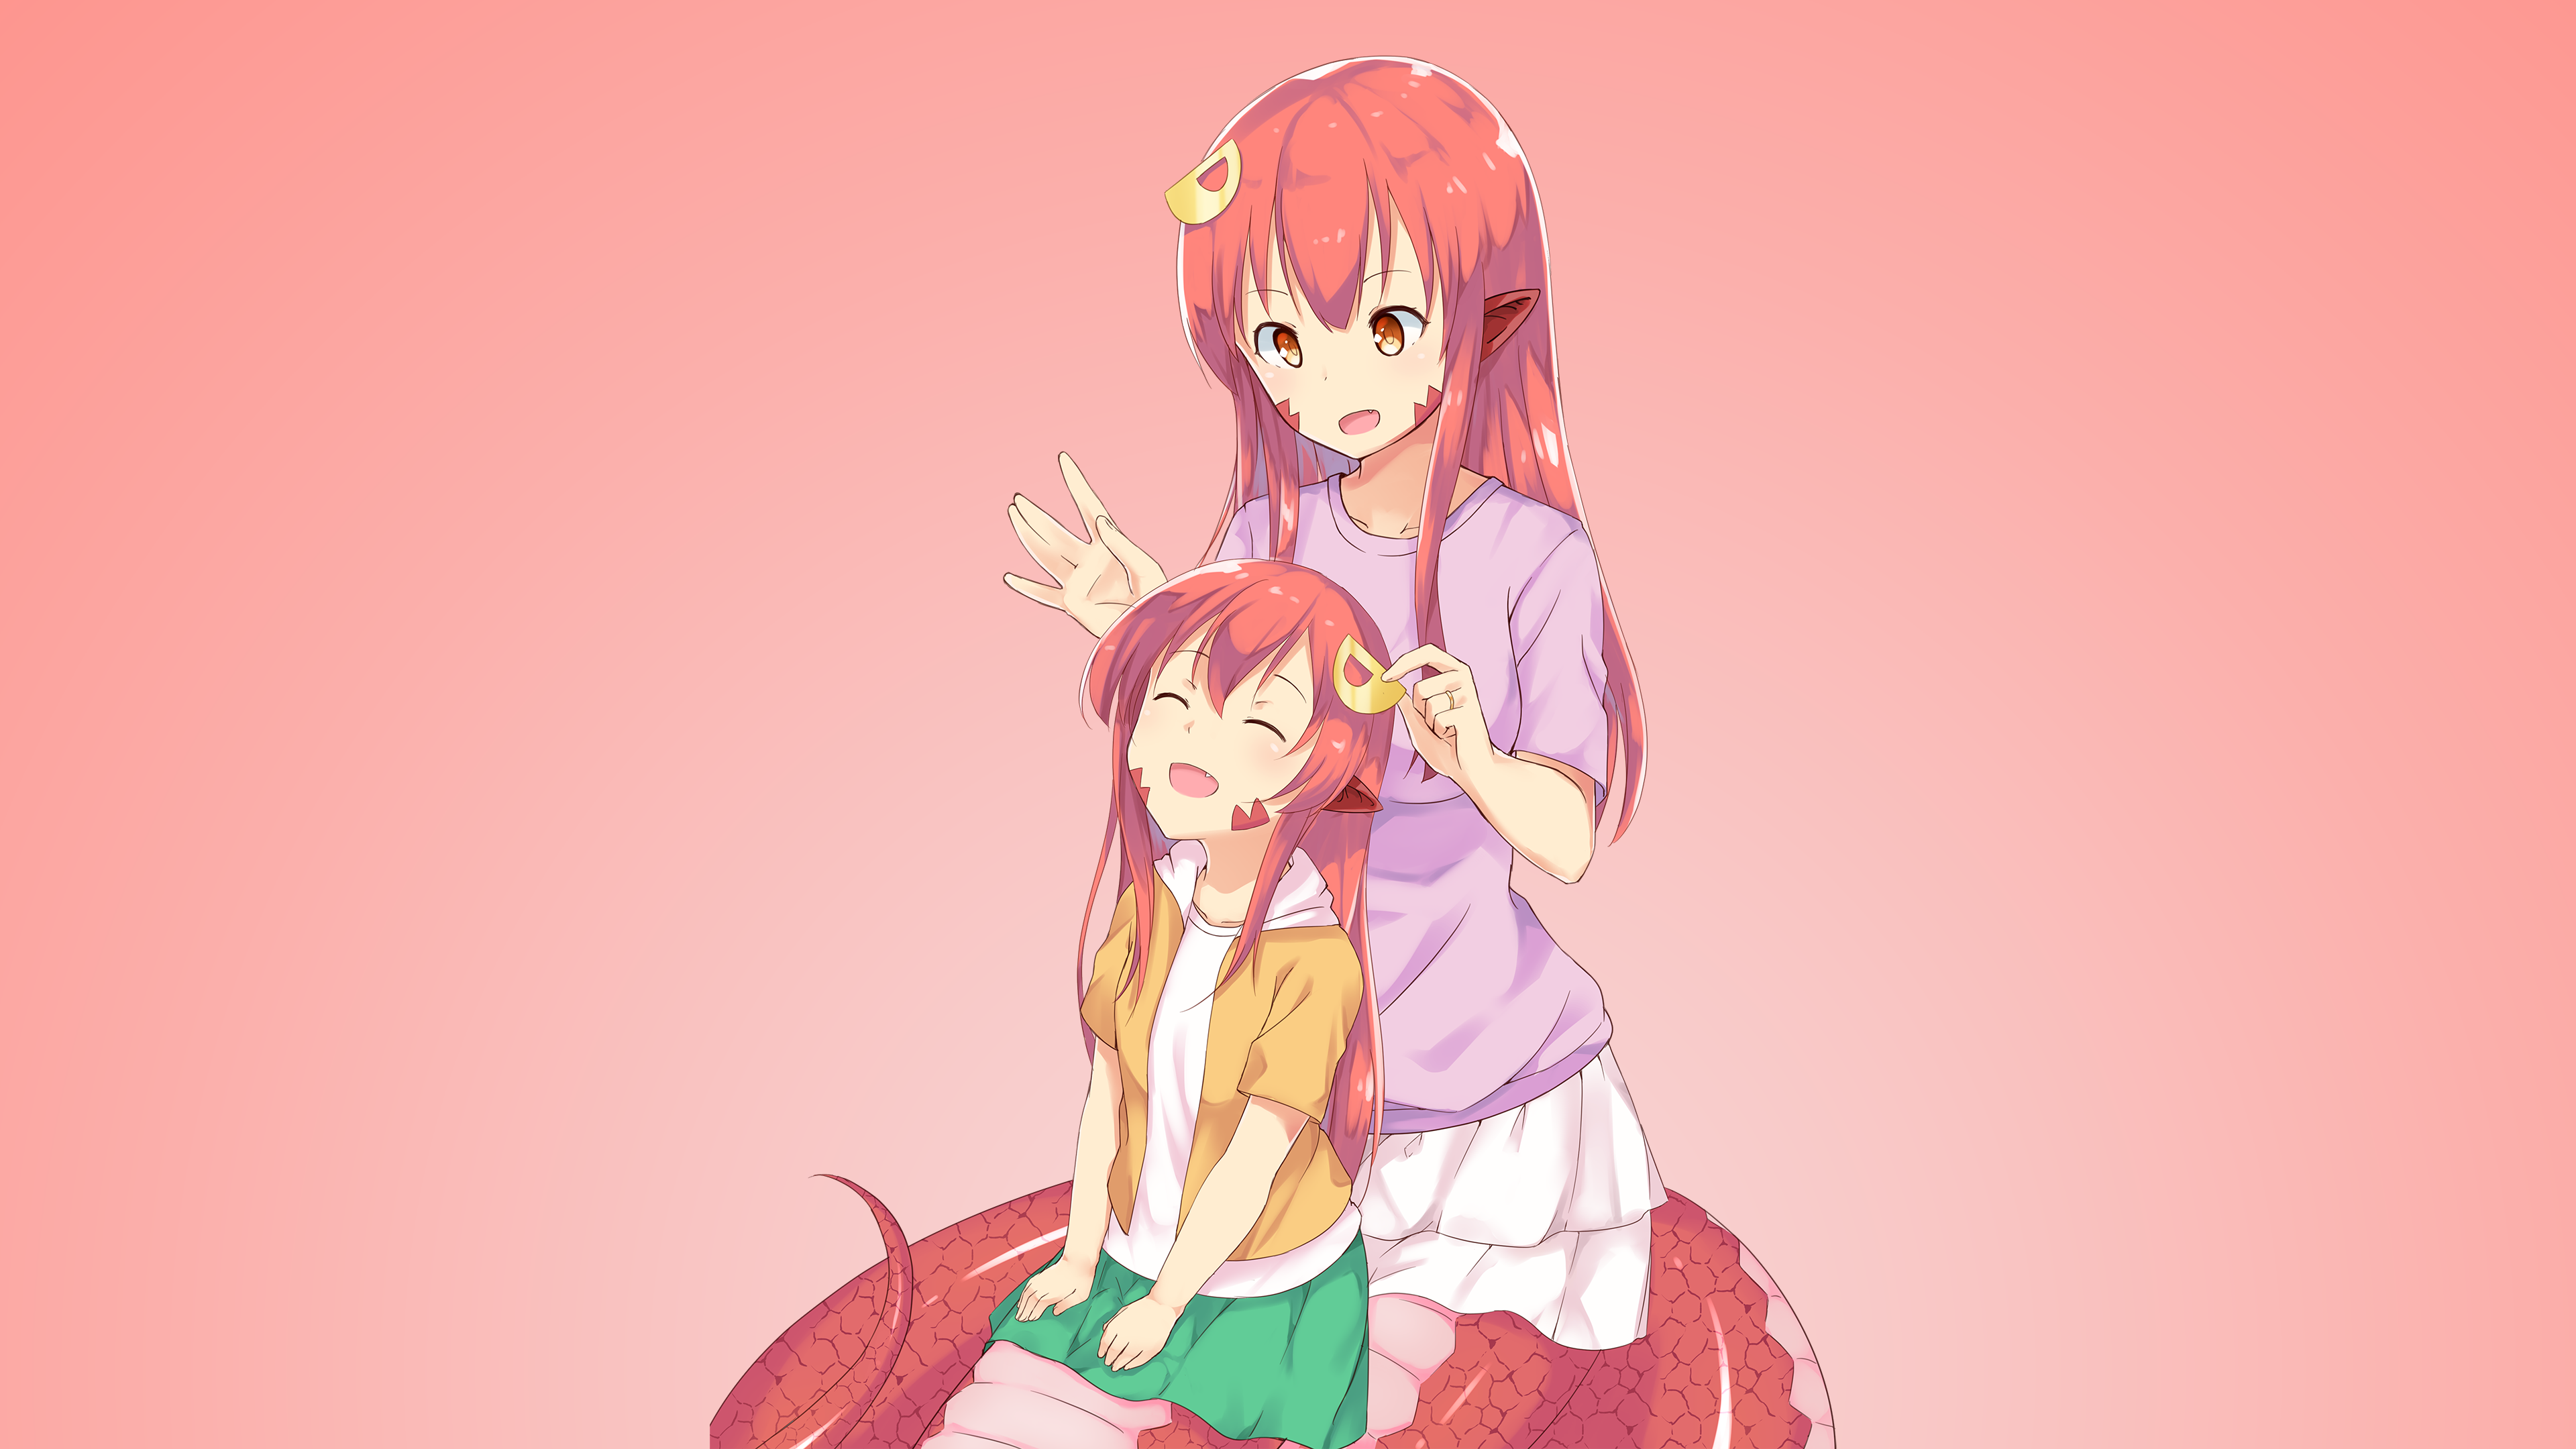 Miia and her daughter (3840x2160) HD Wallpaper From Gallsource.com